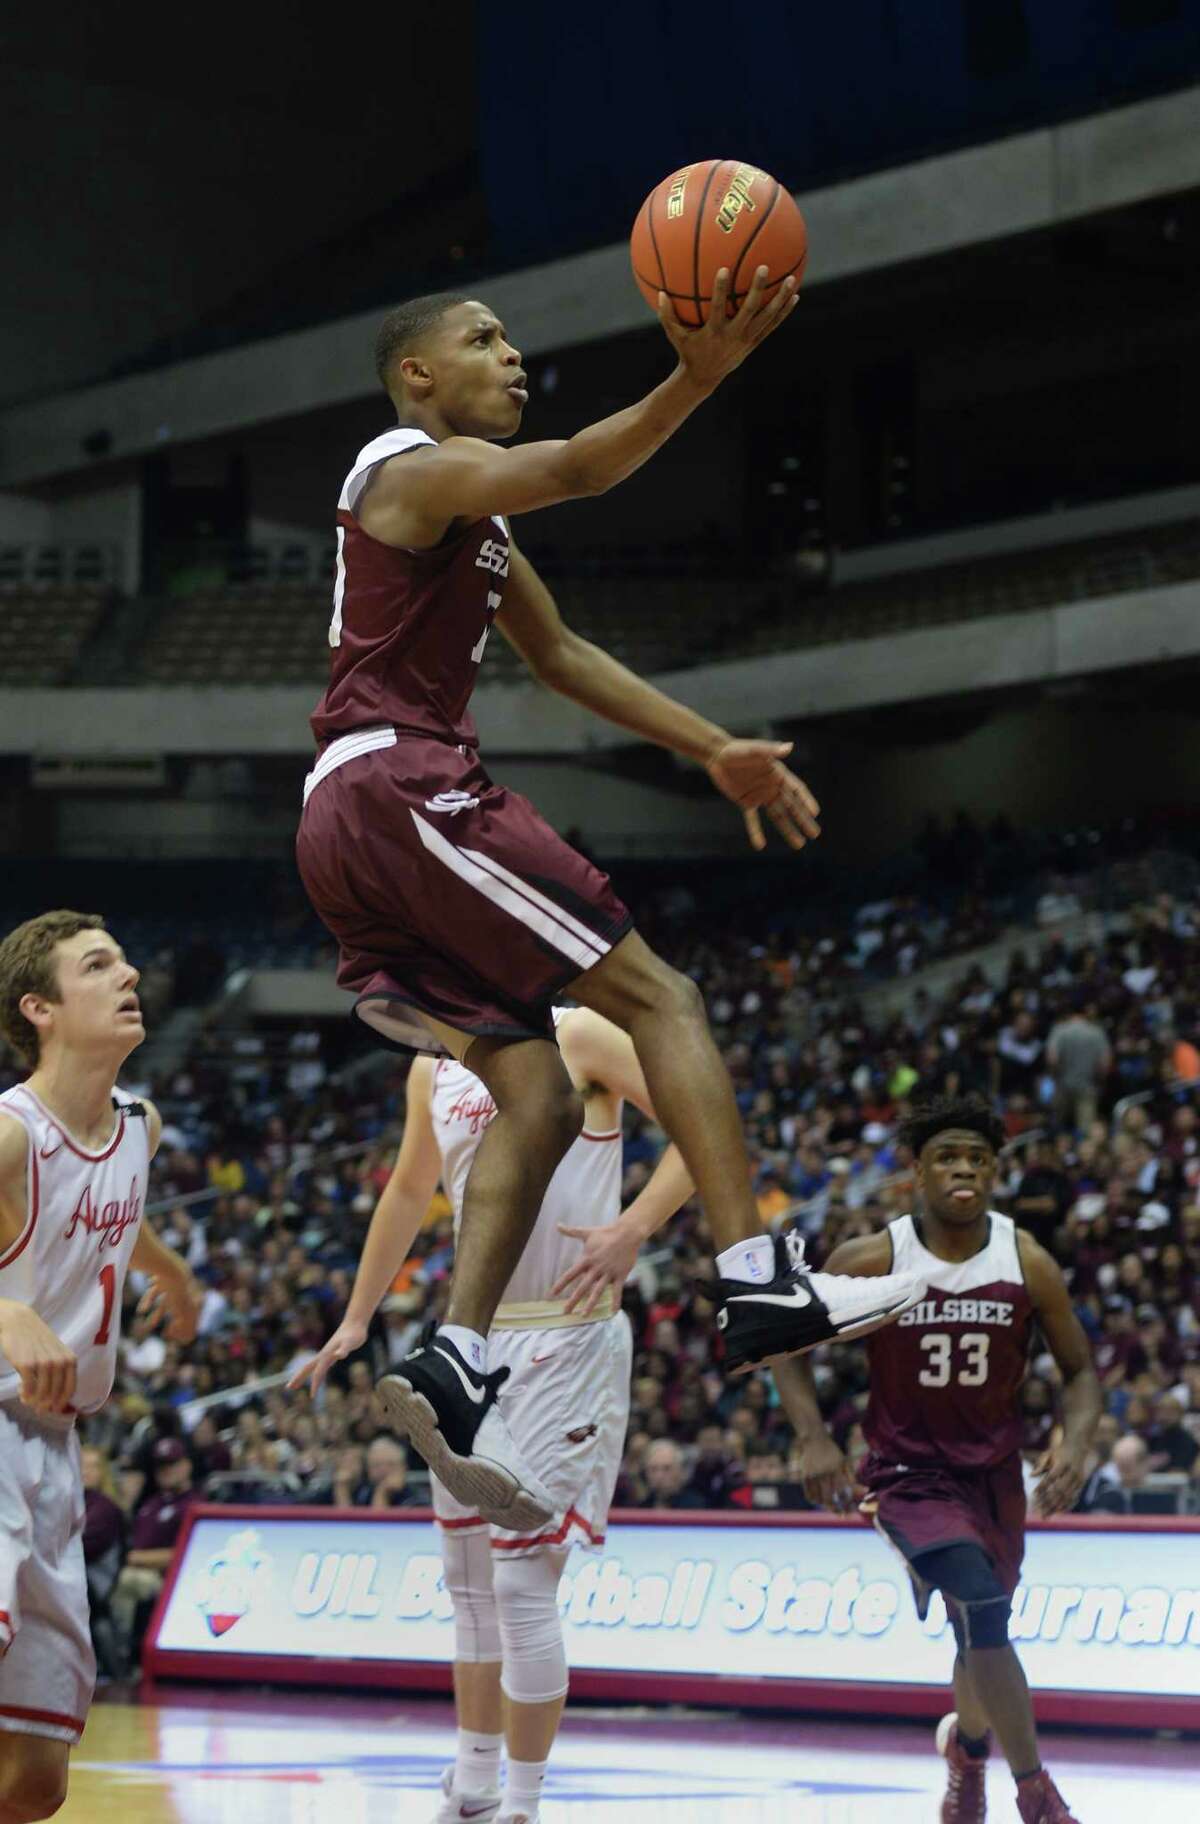 Sislbee's Trajan Harris against Argyle at UIL state tournament in San Antonio on Friday. Photo taken Friday, March 10, 2017 Guiseppe Barranco/The Enterprise